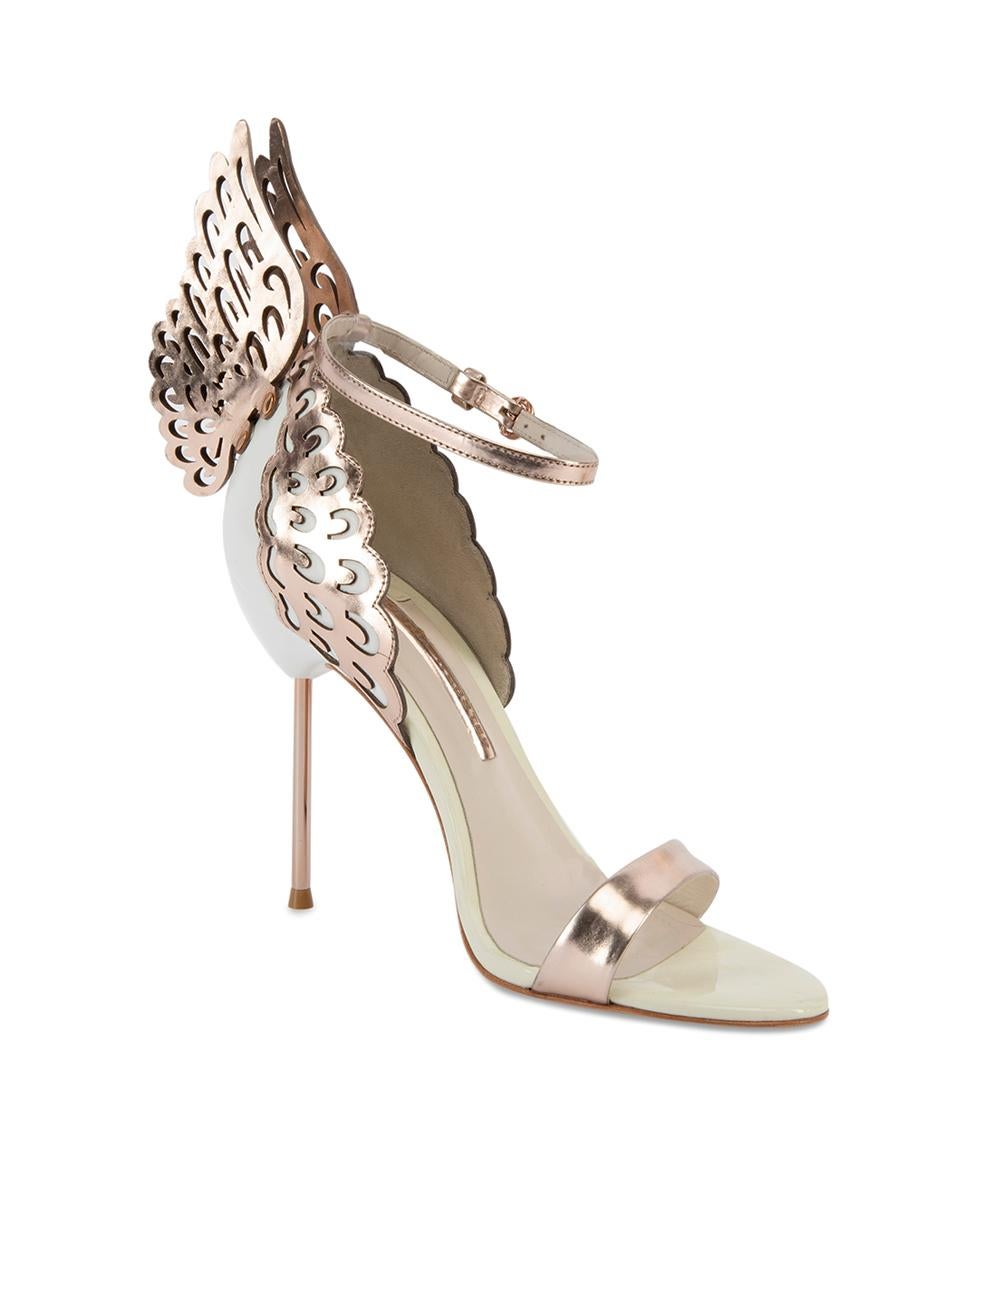 CONDITION is Very good. Minimal wear to heels is evident. Minimal wear to the exterior leather and wings at the back of shoes on this used Sophia Webster designer resale item. Details White and rose gold Leather Sandals Almond toe High heel Rose